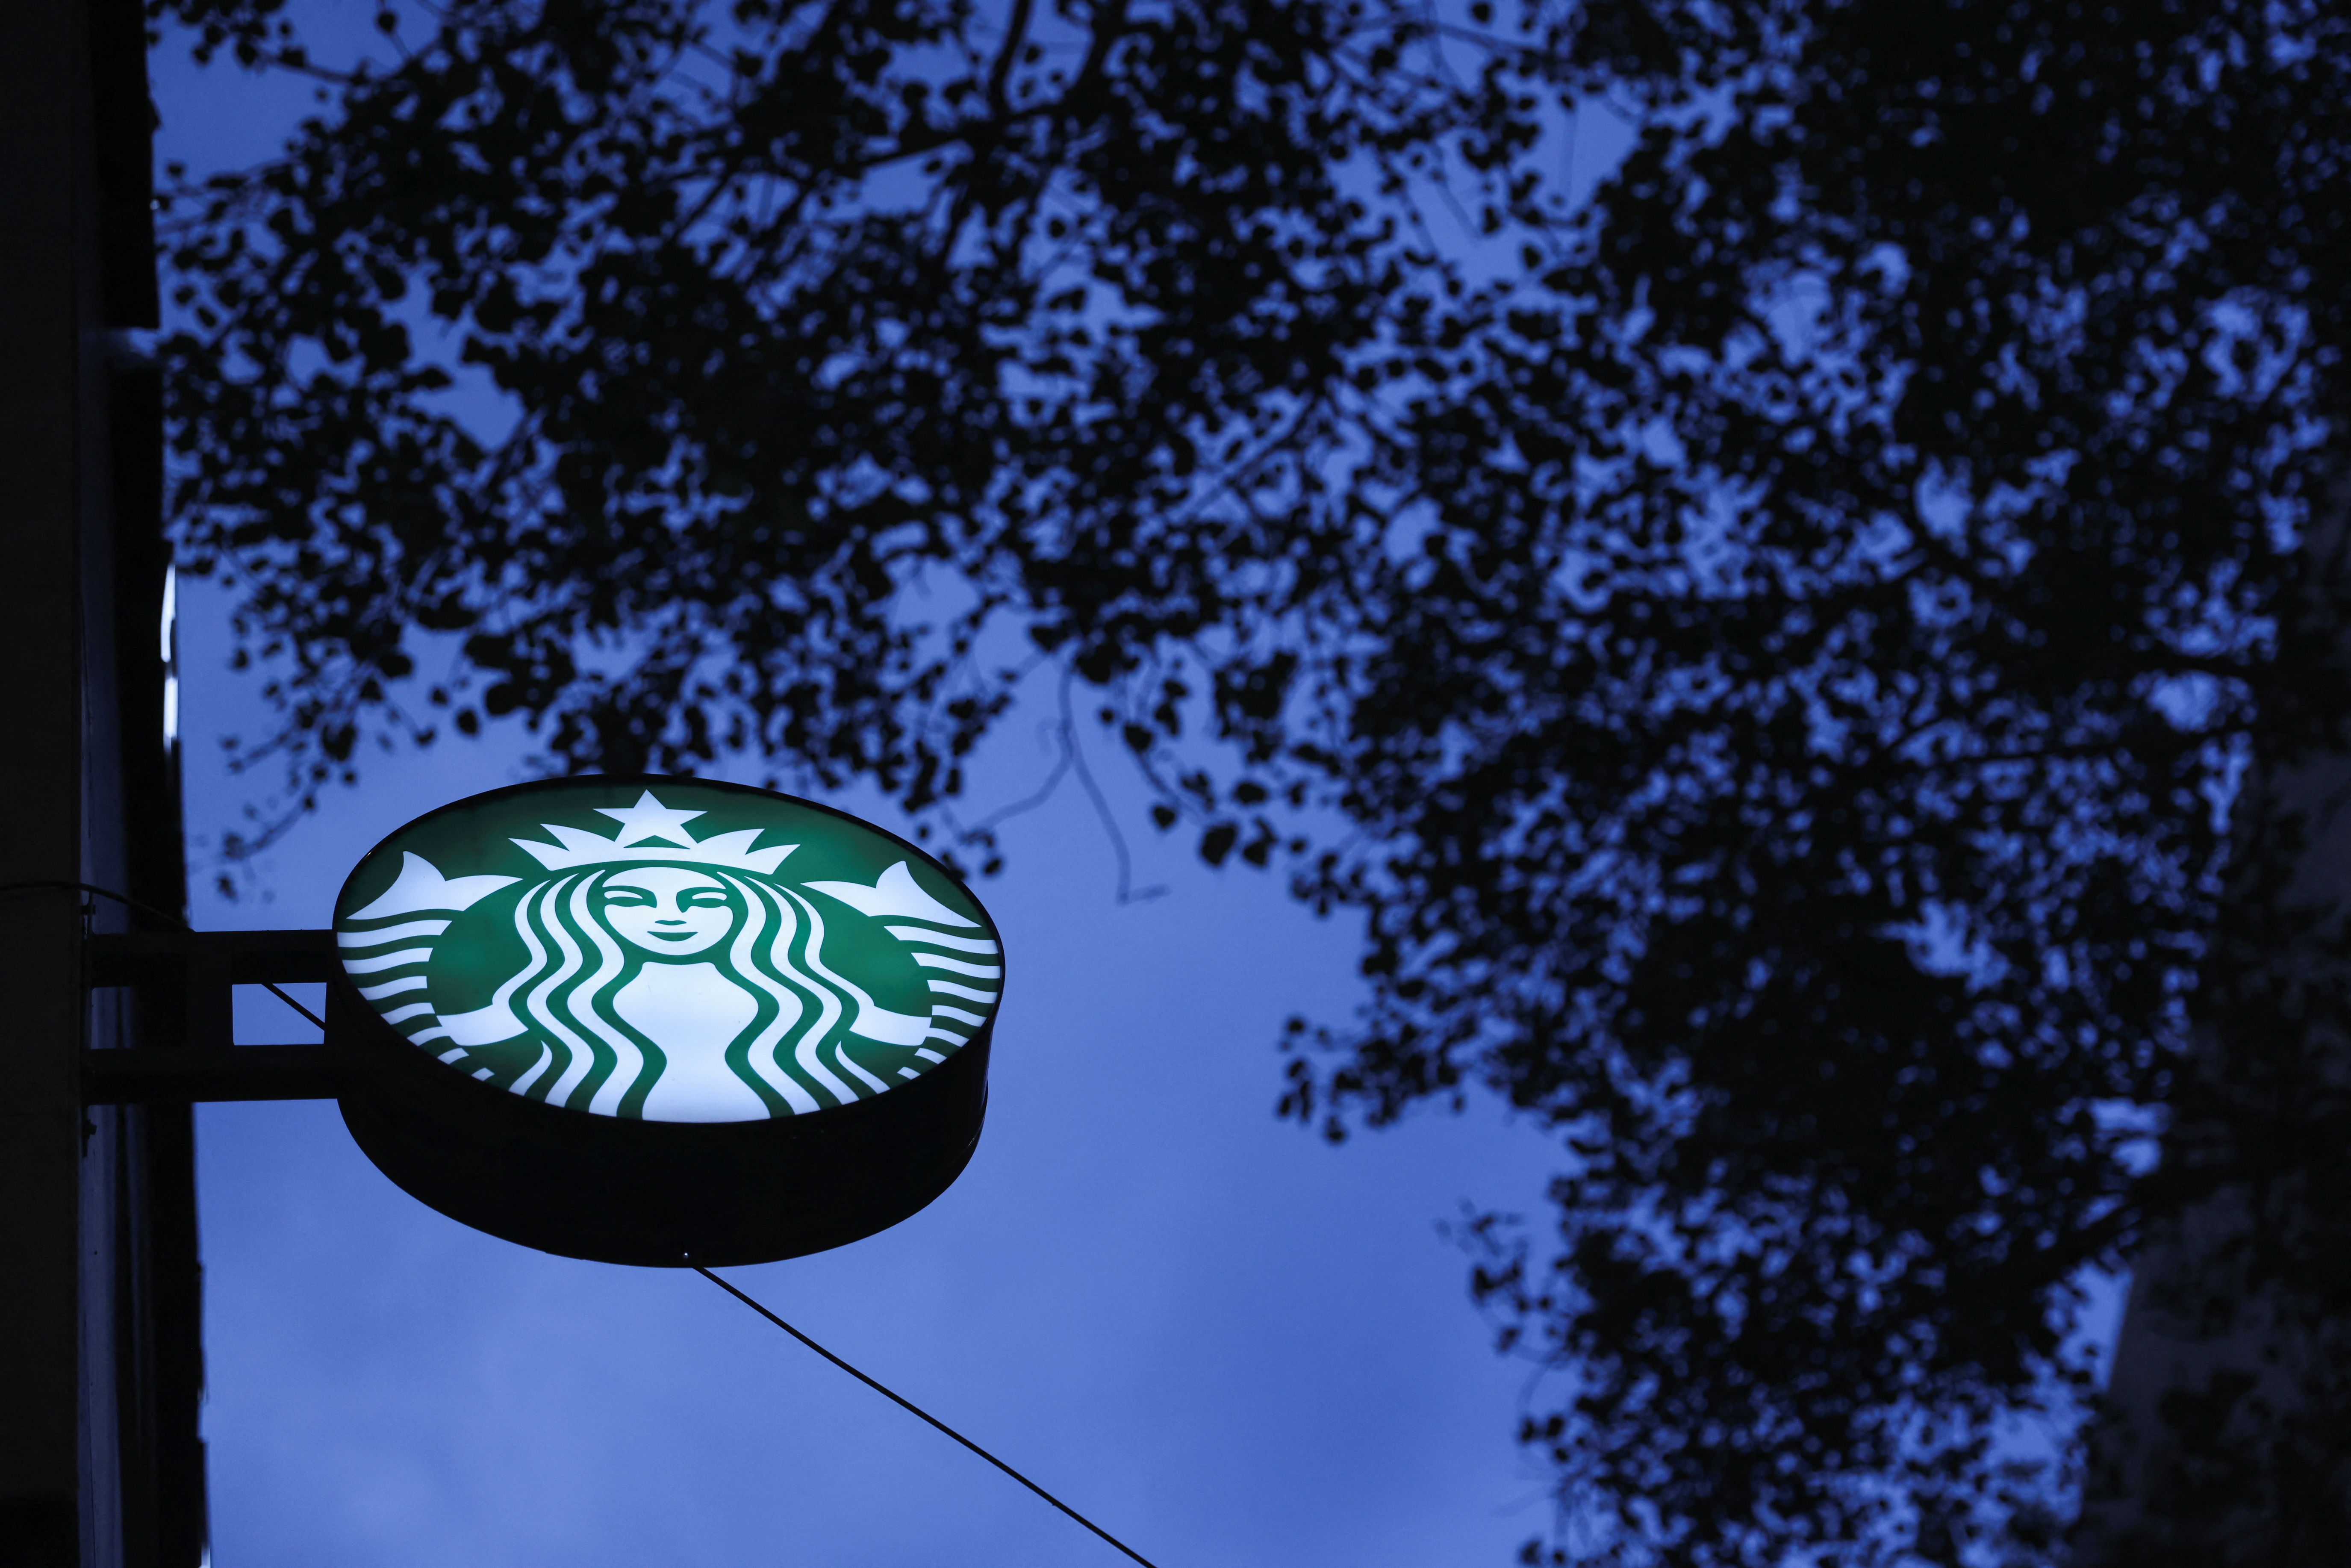 A view shows a Starbucks logo at a Starbucks coffee outlet in New Delhi